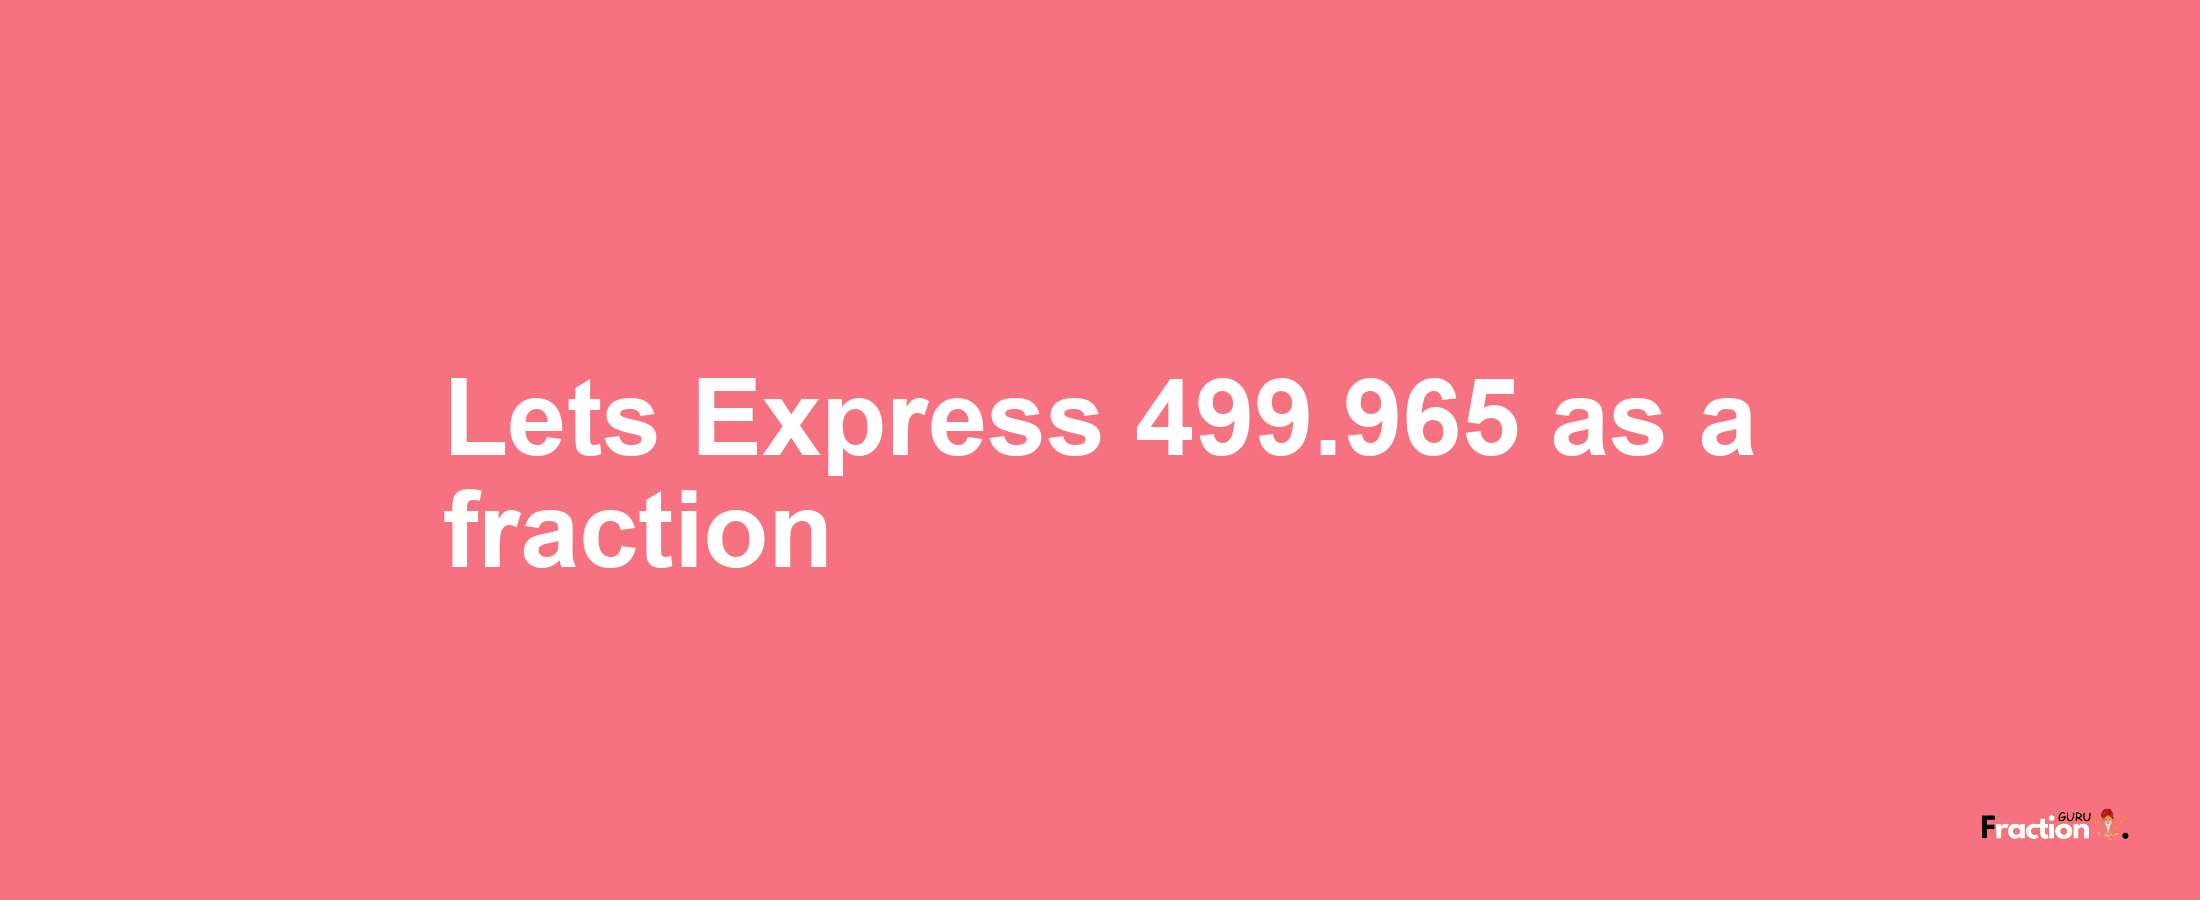 Lets Express 499.965 as afraction